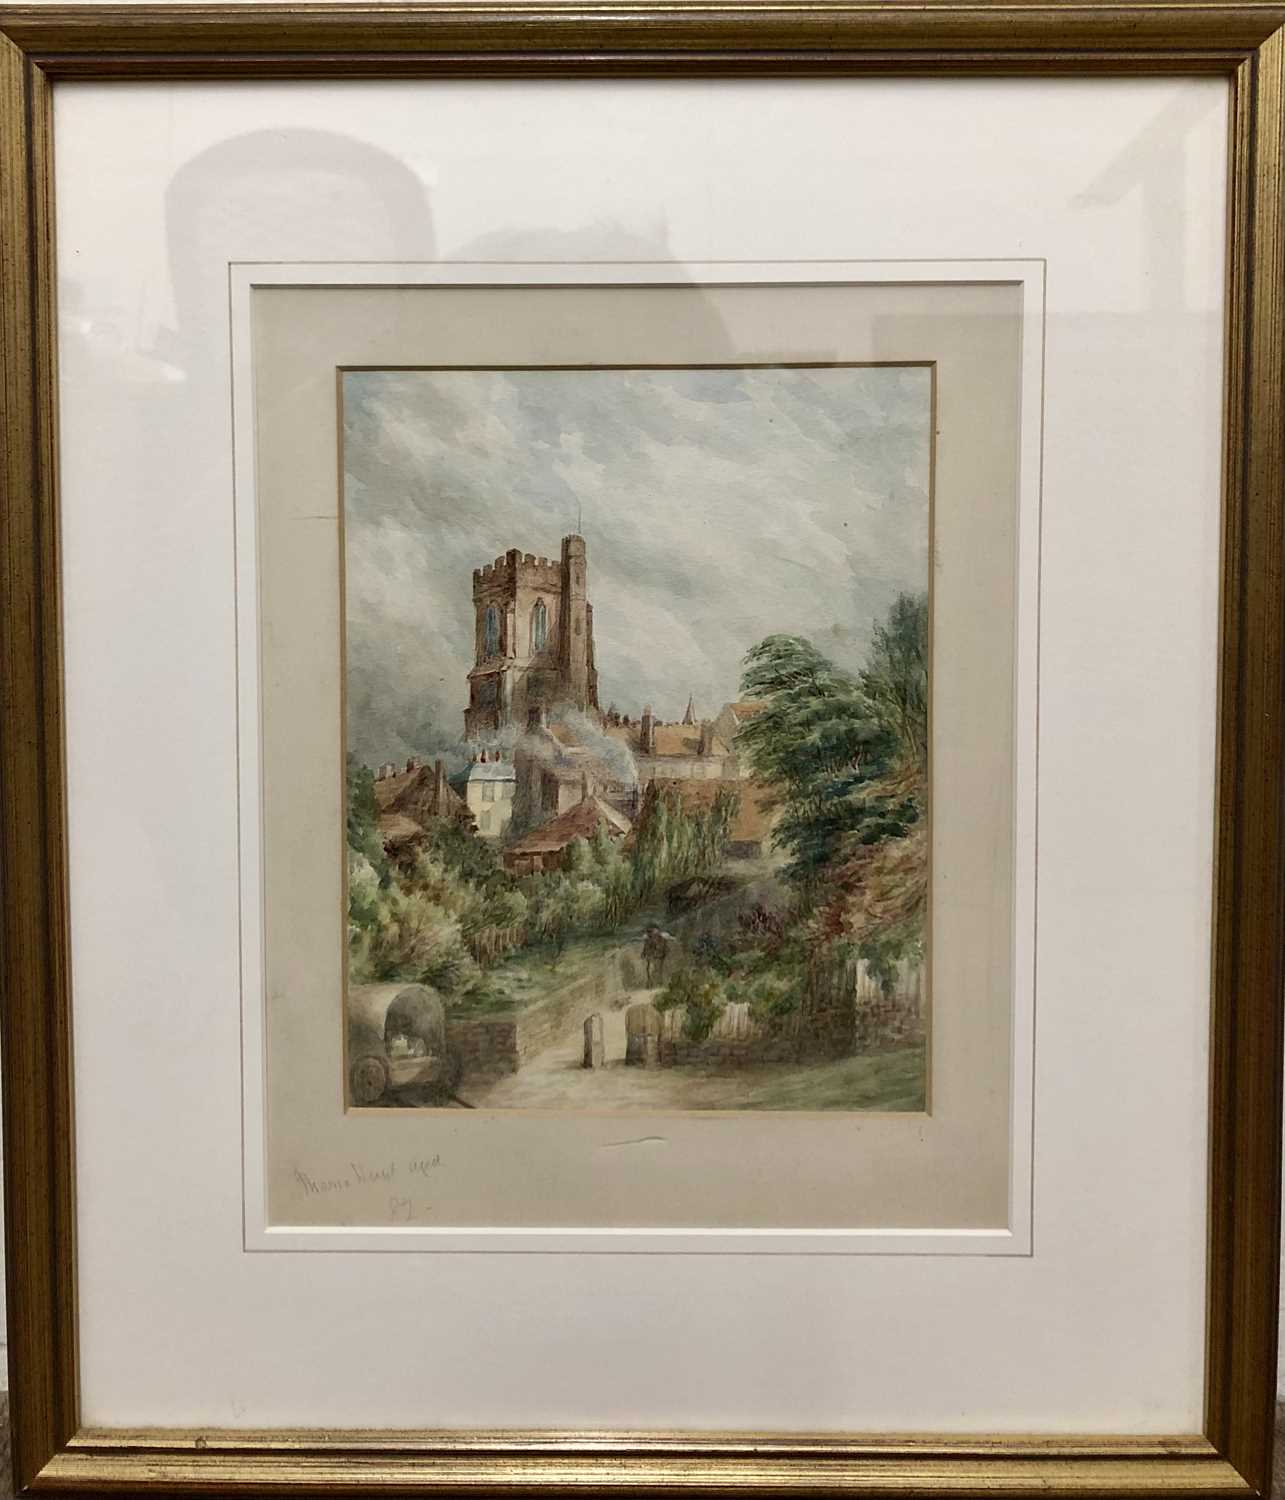 Maria Hunt (British, 19th Century), Old Action Church, London, watercolour, signed and dated 1870.